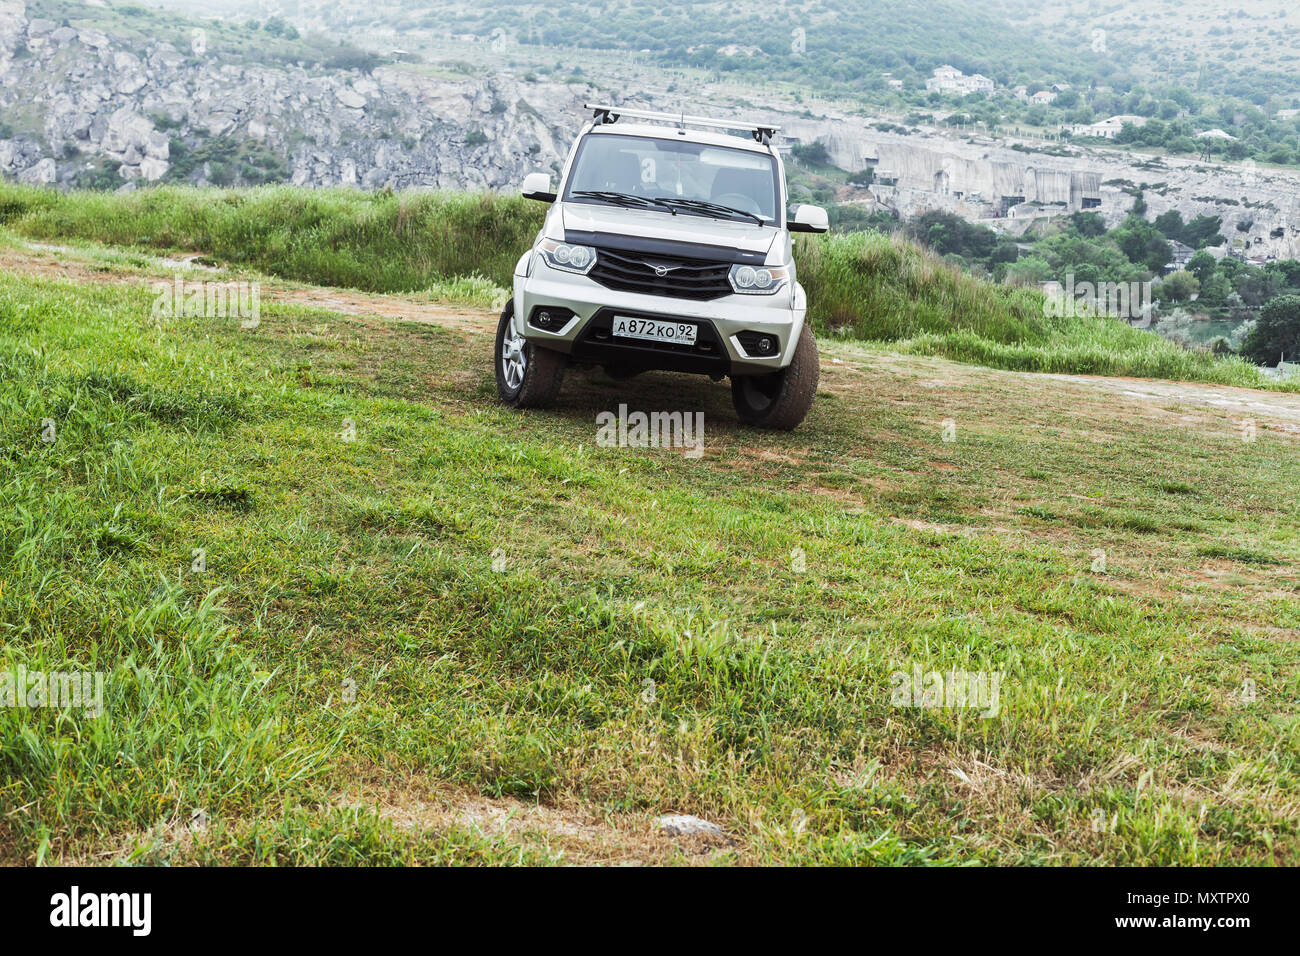 Sevastopol, Crimea - May 7, 2018: Silver gray UAZ Patriot stands on grass in mountains. UAZ-3163, mid-size SUV produced by UAZ division of SeverstalAv Stock Photo